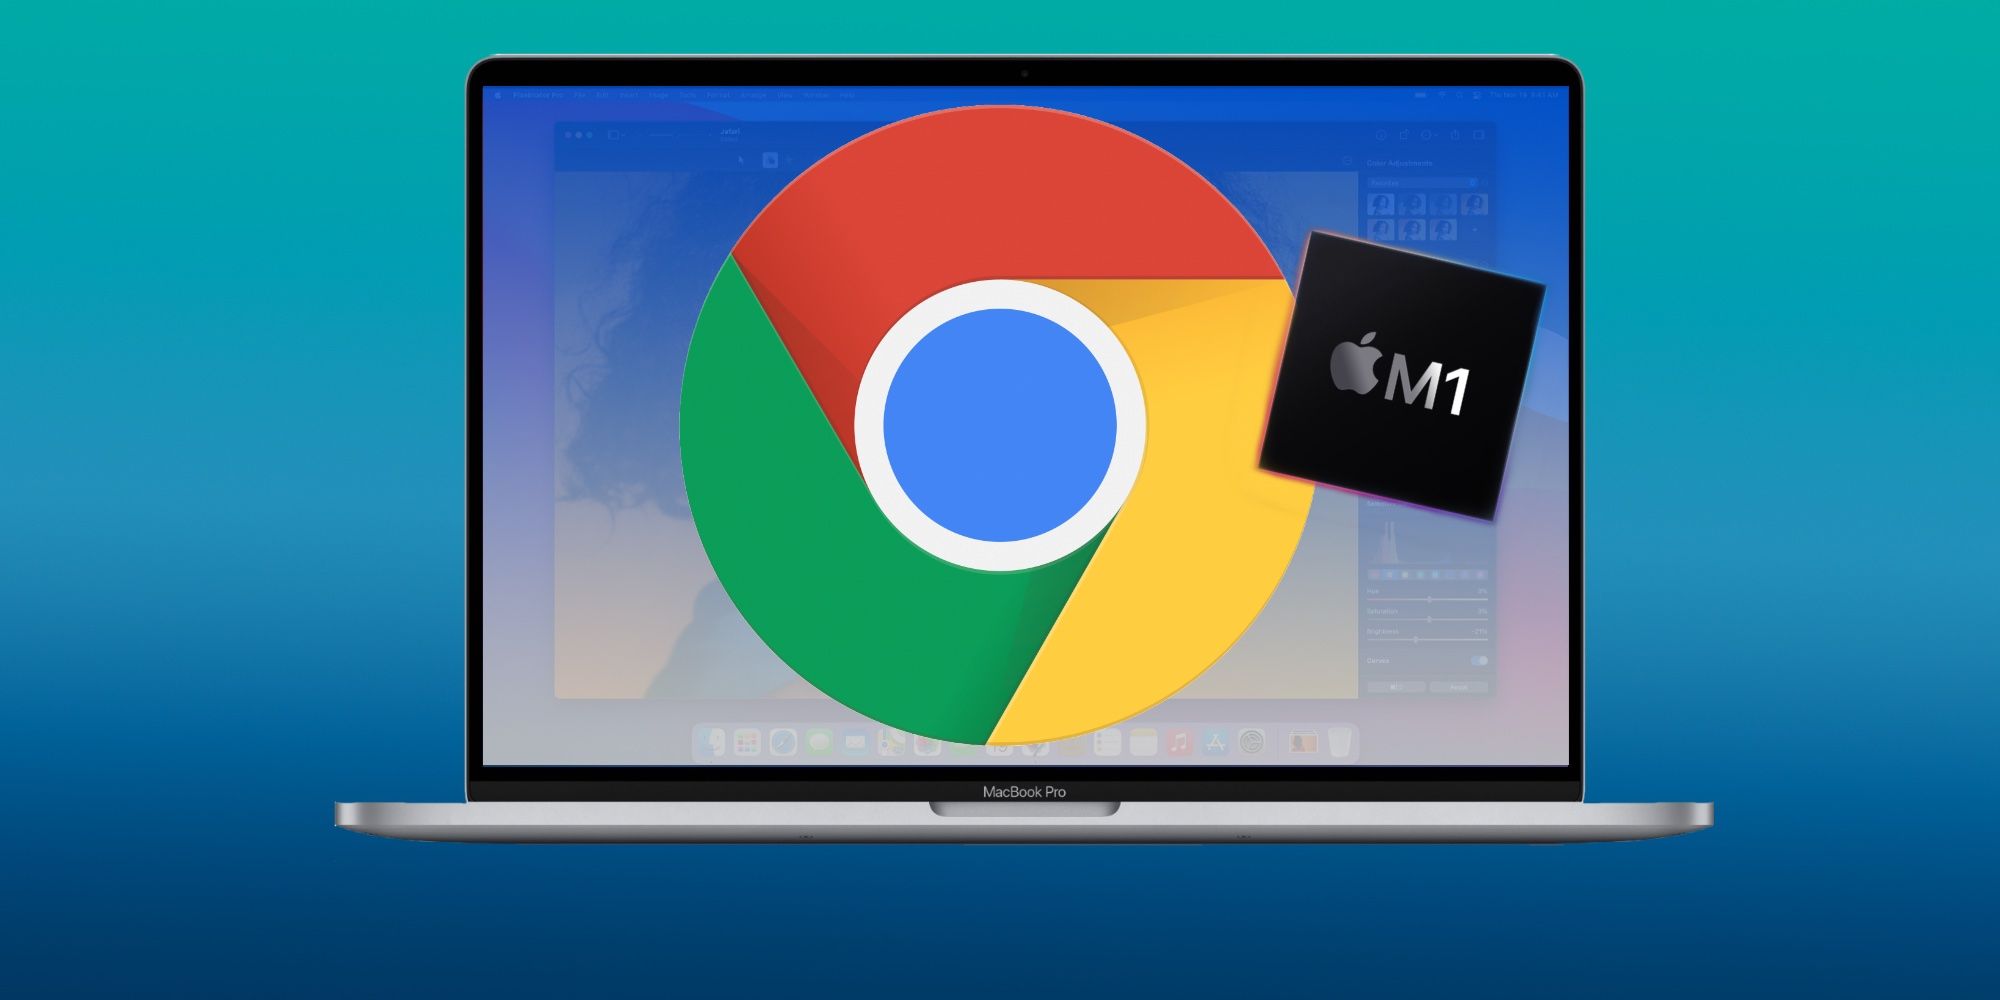 M1 MacBook with Google Chrome on its screen